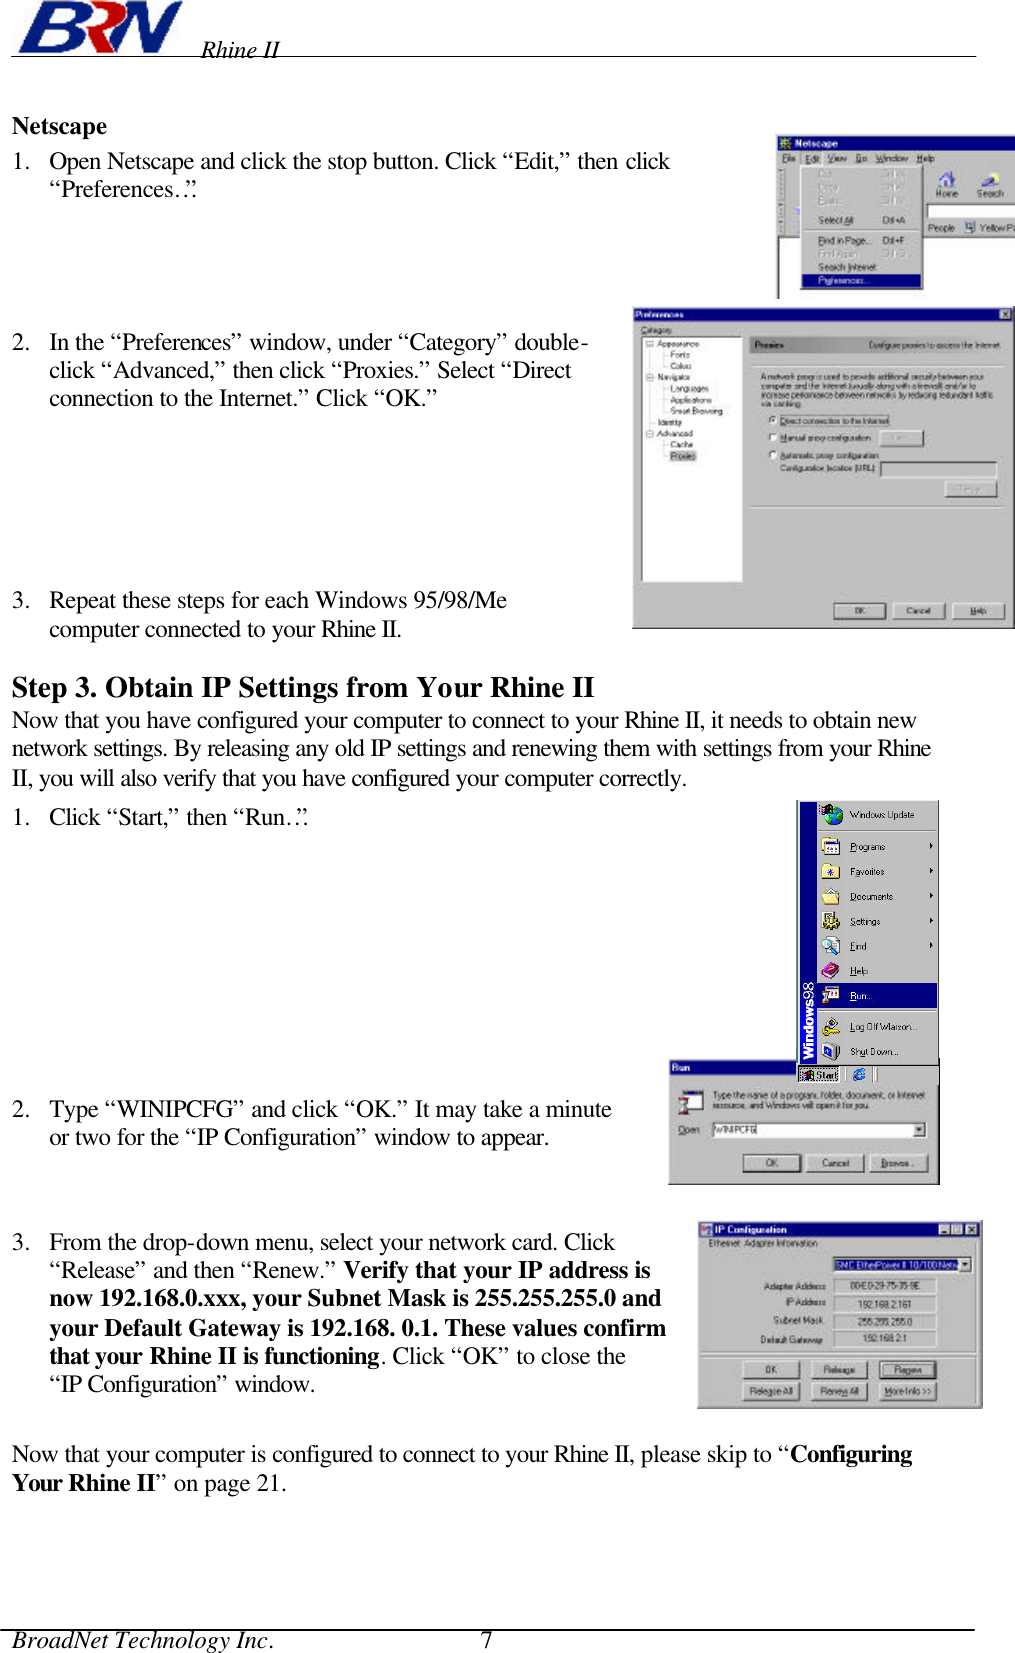    Rhine II BroadNet Technology Inc.                                 7 Netscape 1.  Open Netscape and click the stop button. Click “Edit,” then click “Preferences…”     2.  In the “Preferences” window, under “Category” double-click “Advanced,” then click “Proxies.” Select “Direct connection to the Internet.” Click “OK.”       3.  Repeat these steps for each Windows 95/98/Me computer connected to your Rhine II.  Step 3. Obtain IP Settings from Your Rhine II Now that you have configured your computer to connect to your Rhine II, it needs to obtain new network settings. By releasing any old IP settings and renewing them with settings from your Rhine II, you will also verify that you have configured your computer correctly. 1.  Click “Start,” then “Run…”     2.  Type “WINIPCFG” and click “OK.” It may take a minute or two for the “IP Configuration” window to appear.  3.  From the drop-down menu, select your network card. Click “Release” and then “Renew.” Verify that your IP address is now 192.168.0.xxx, your Subnet Mask is 255.255.255.0 and your Default Gateway is 192.168. 0.1. These values confirm that your Rhine II is functioning. Click “OK” to close the “IP Configuration” window.  Now that your computer is configured to connect to your Rhine II, please skip to “Configuring Your Rhine II” on page 21. 